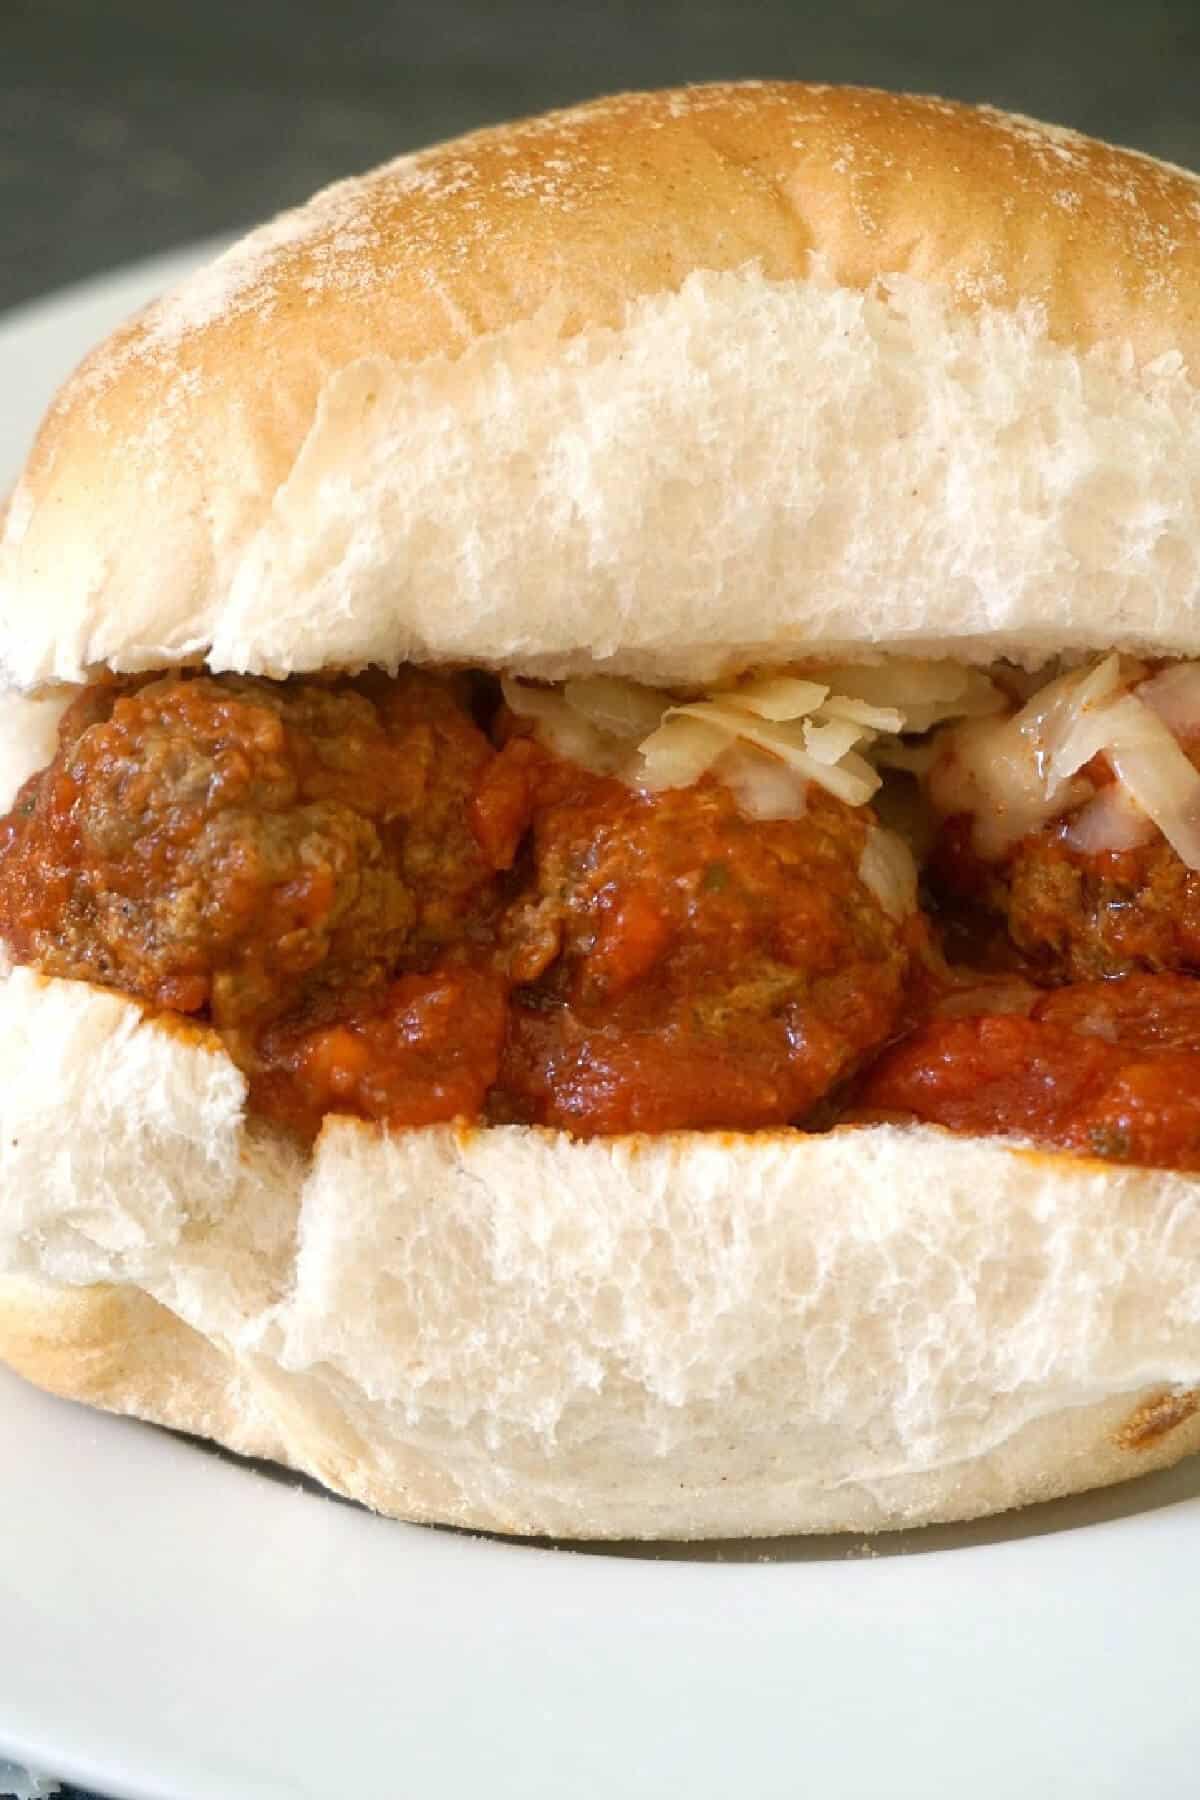 A meatball slider on a white plate.